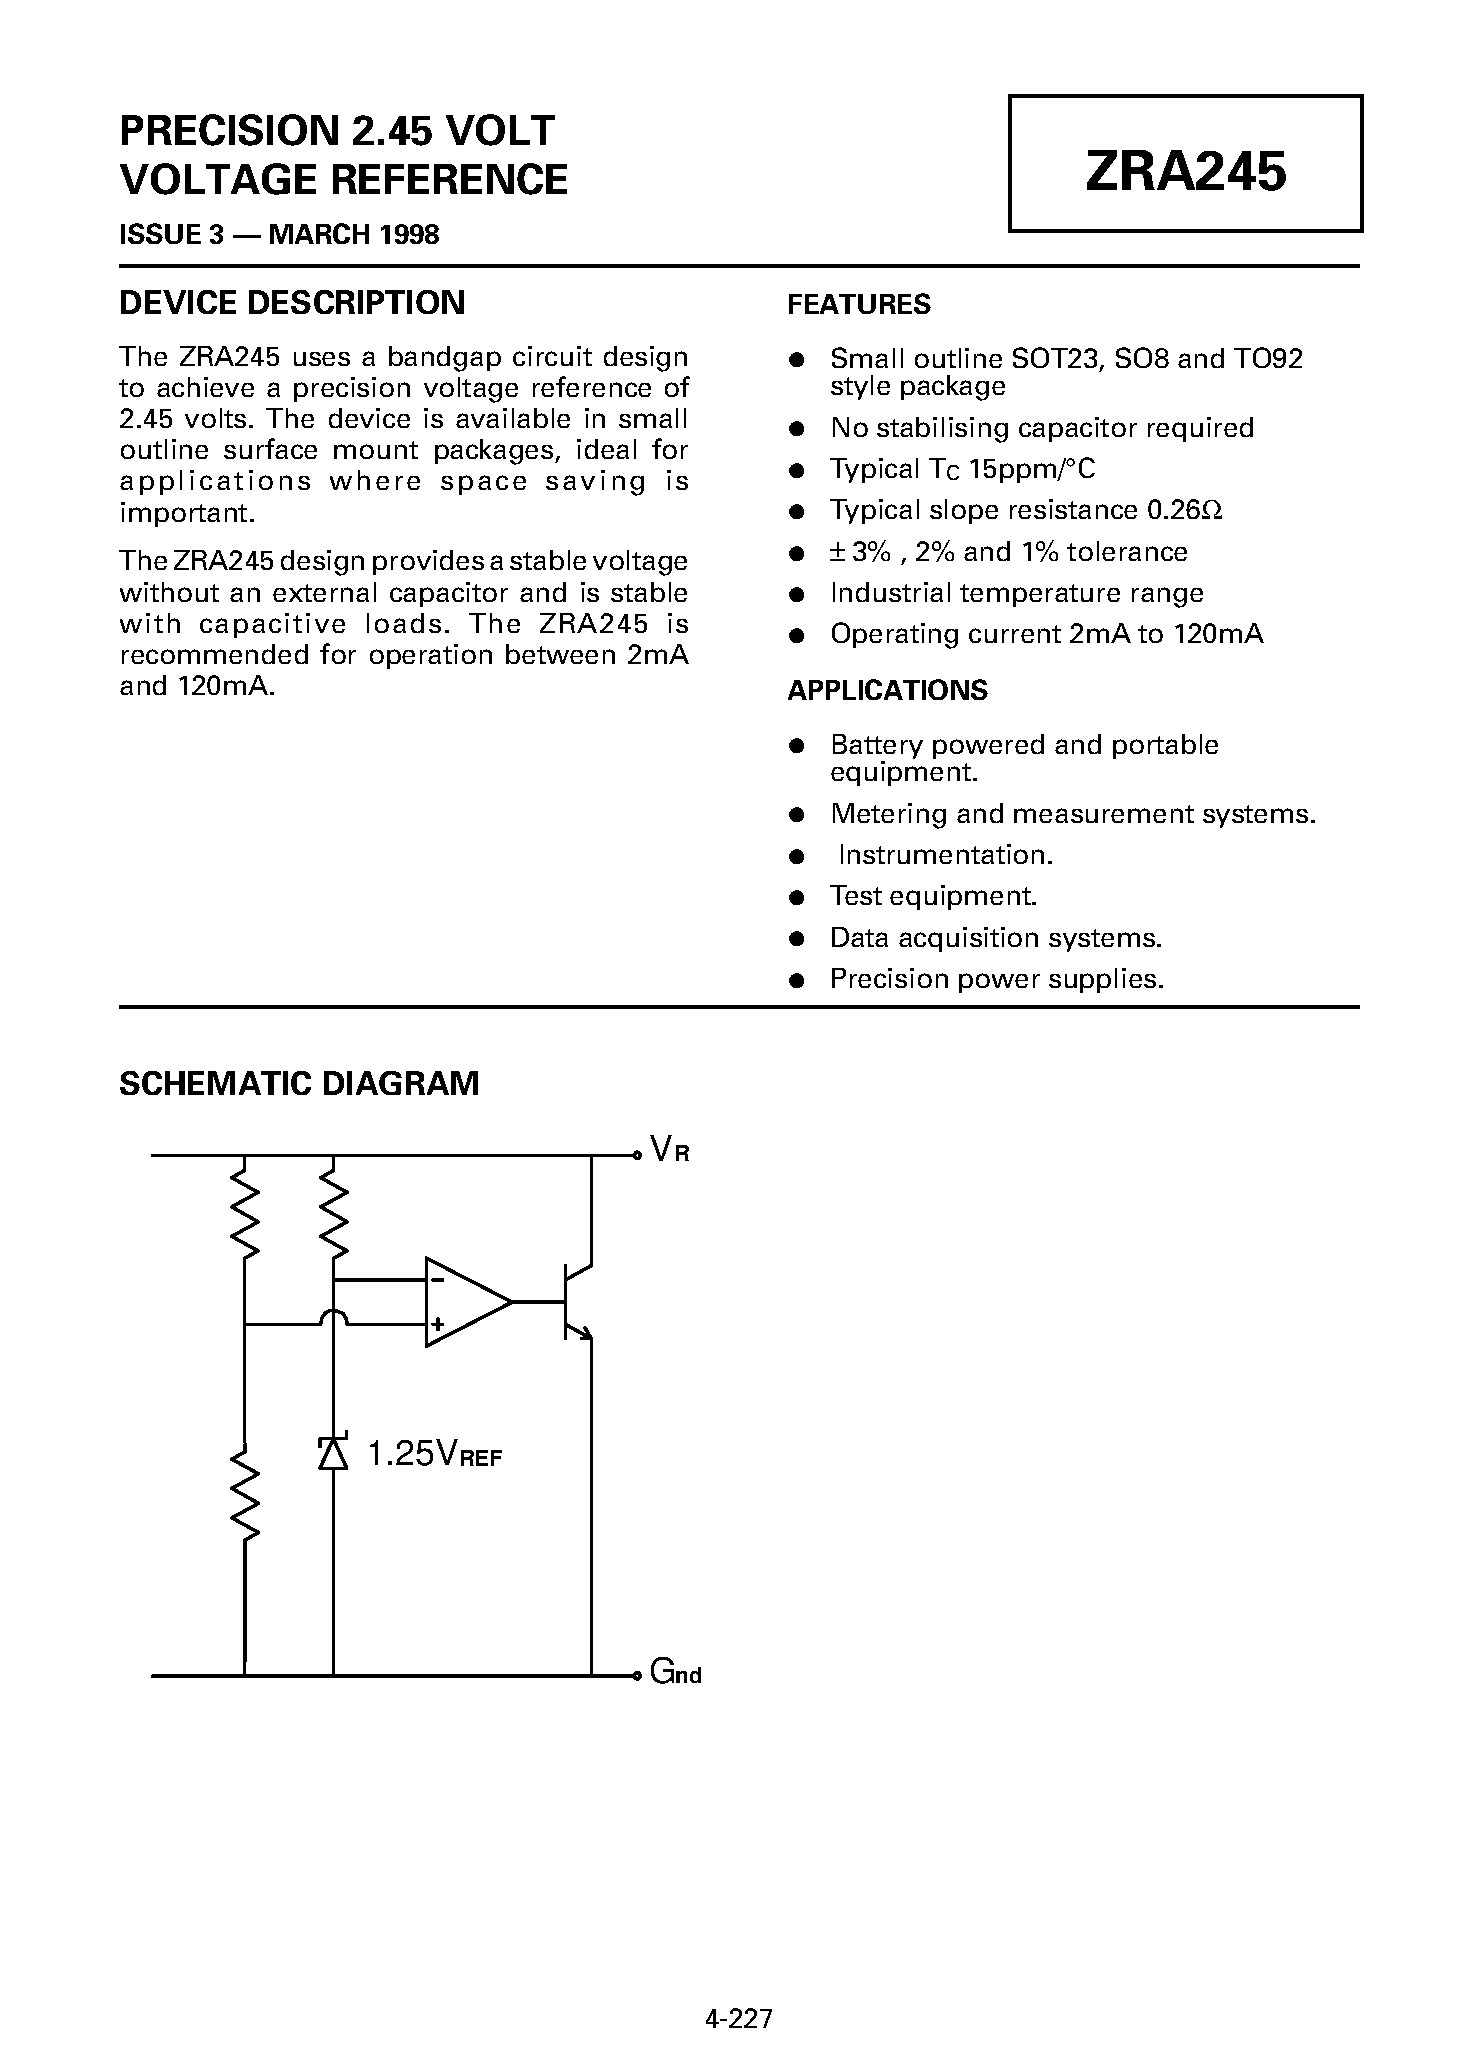 Datasheet ZRA245A02 - PRECISION 2.45 VOLT VOLTAGE REFERENCE page 1